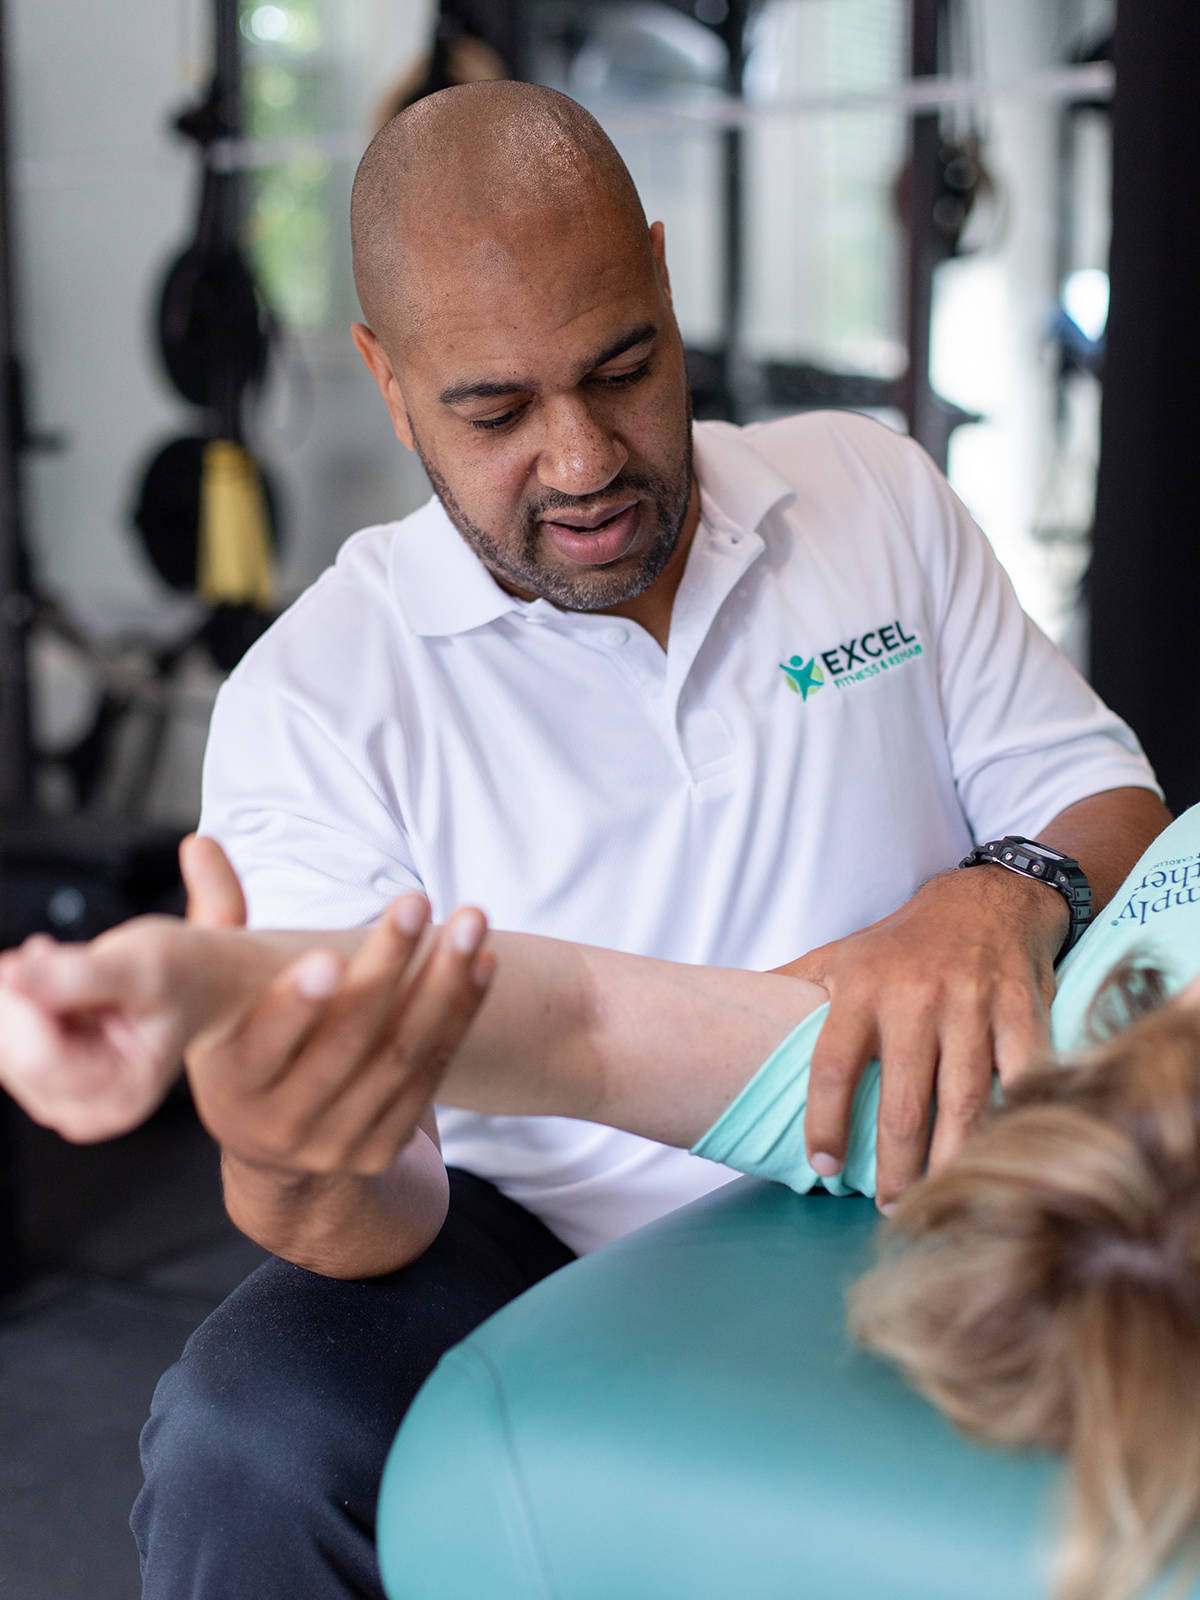 Photo of Excel Fitness and Rehab Gym - JD stretches client's arm after workout